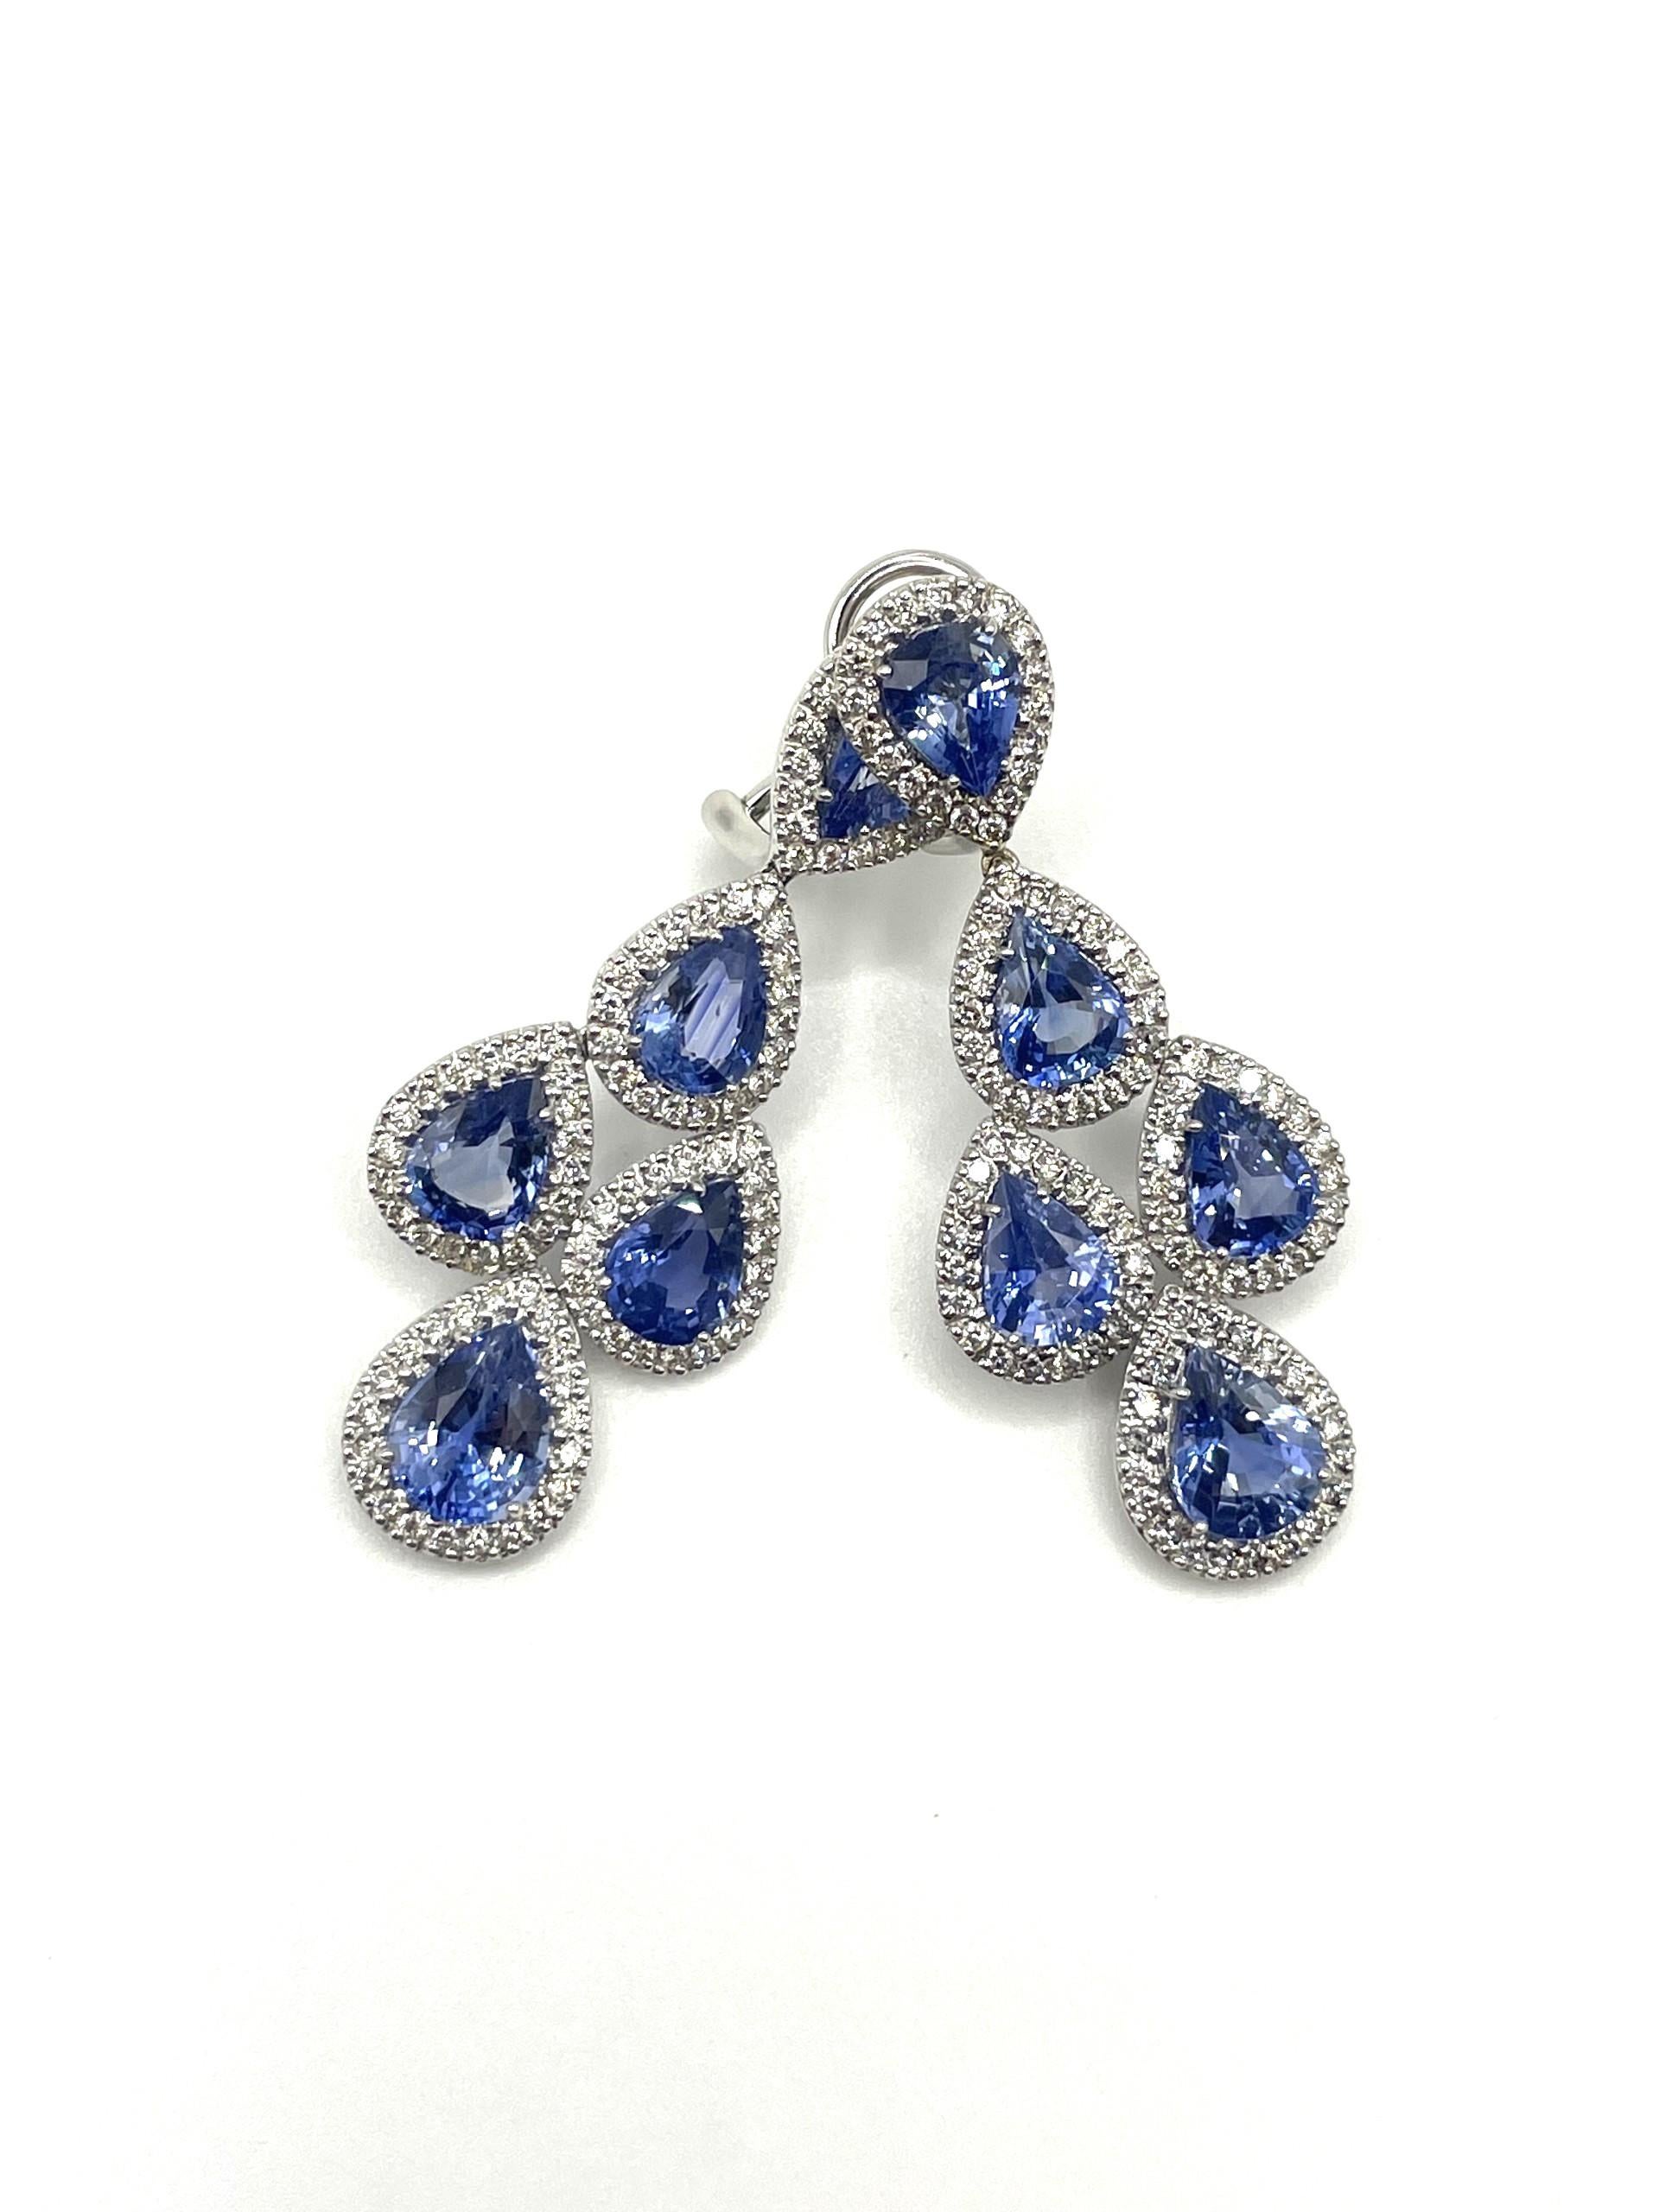 A pair of 18kt white gold pear shape chandelier earrings set with natural pear shape Ceylon blue sapphires and white diamonds with straight post and omega clip system. Add an elegant touch to any special occasion!

10 natural pear shape Ceylon blue